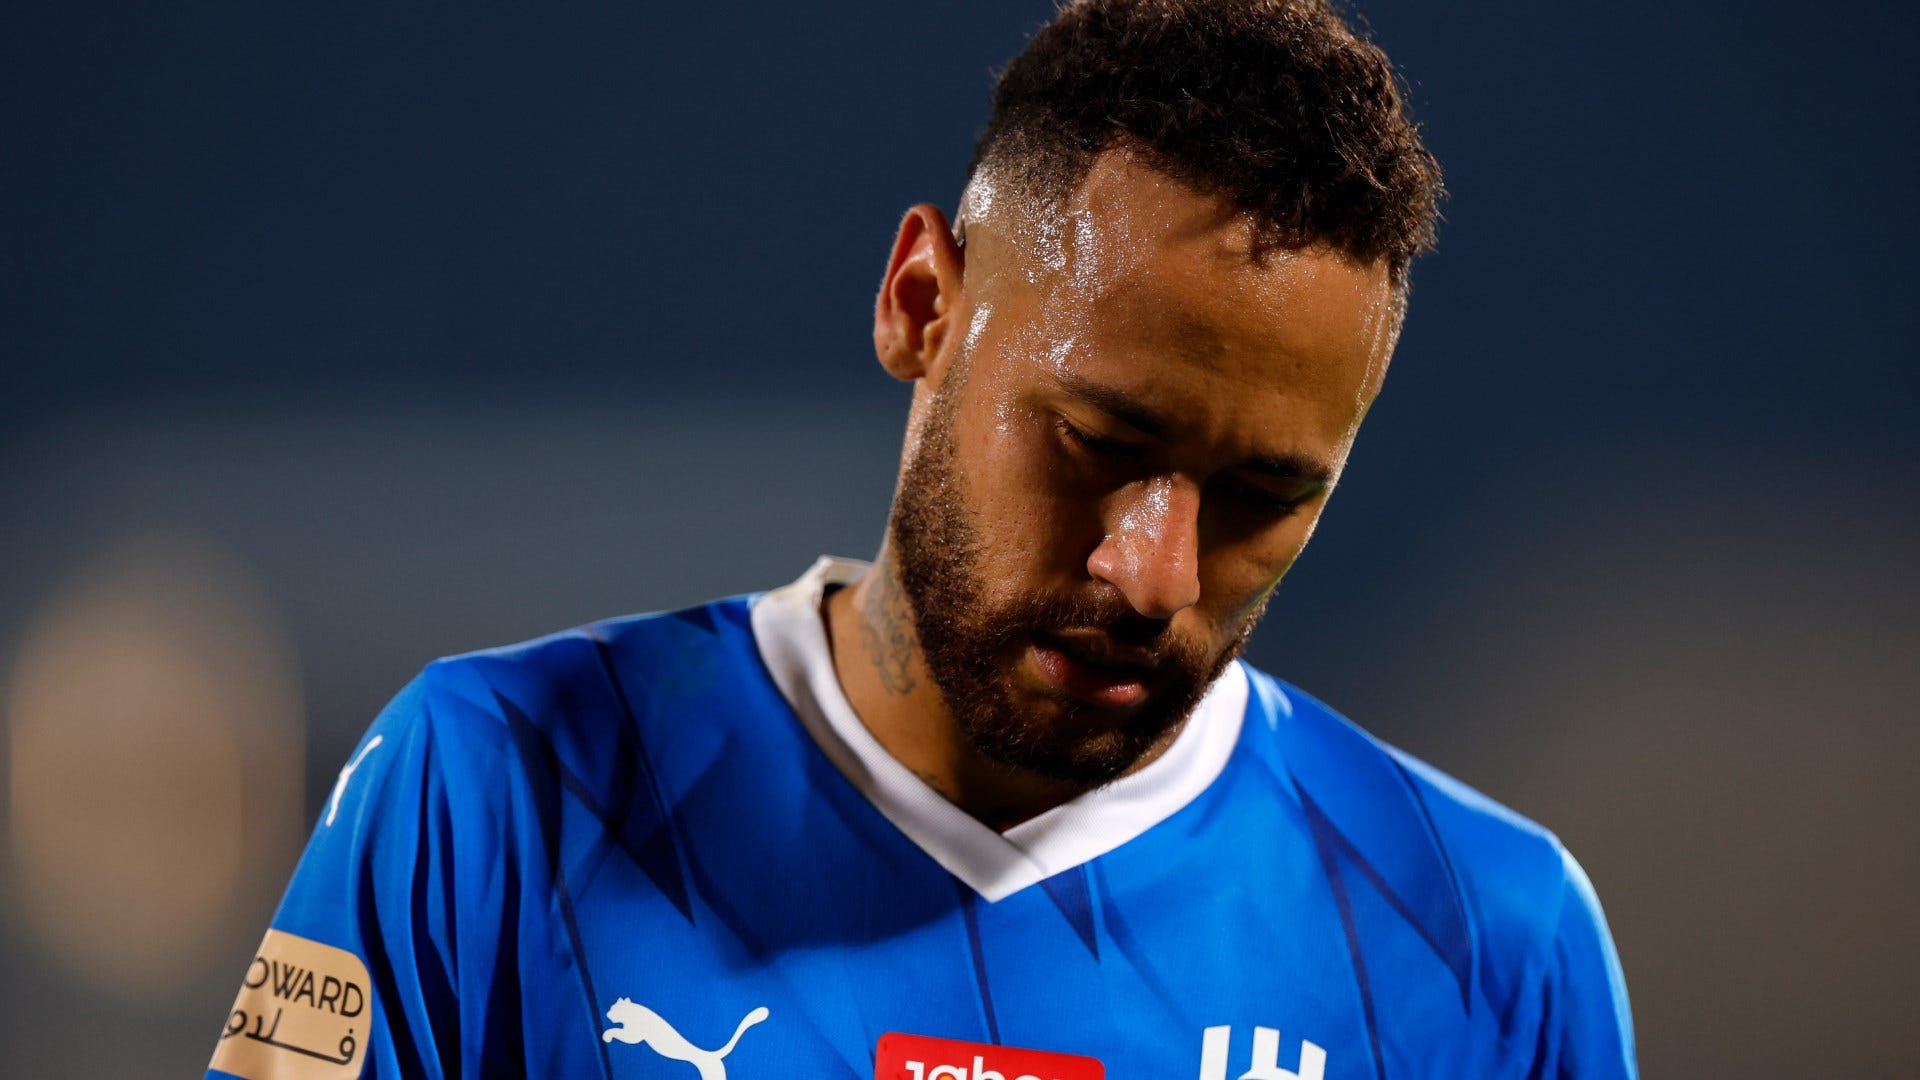 'Not possible' - Neymar astonished by state of Iranian pitch ahead of Al-Hilal's next AFC Champions League fixture as footage emerges showing large areas of exposed concrete